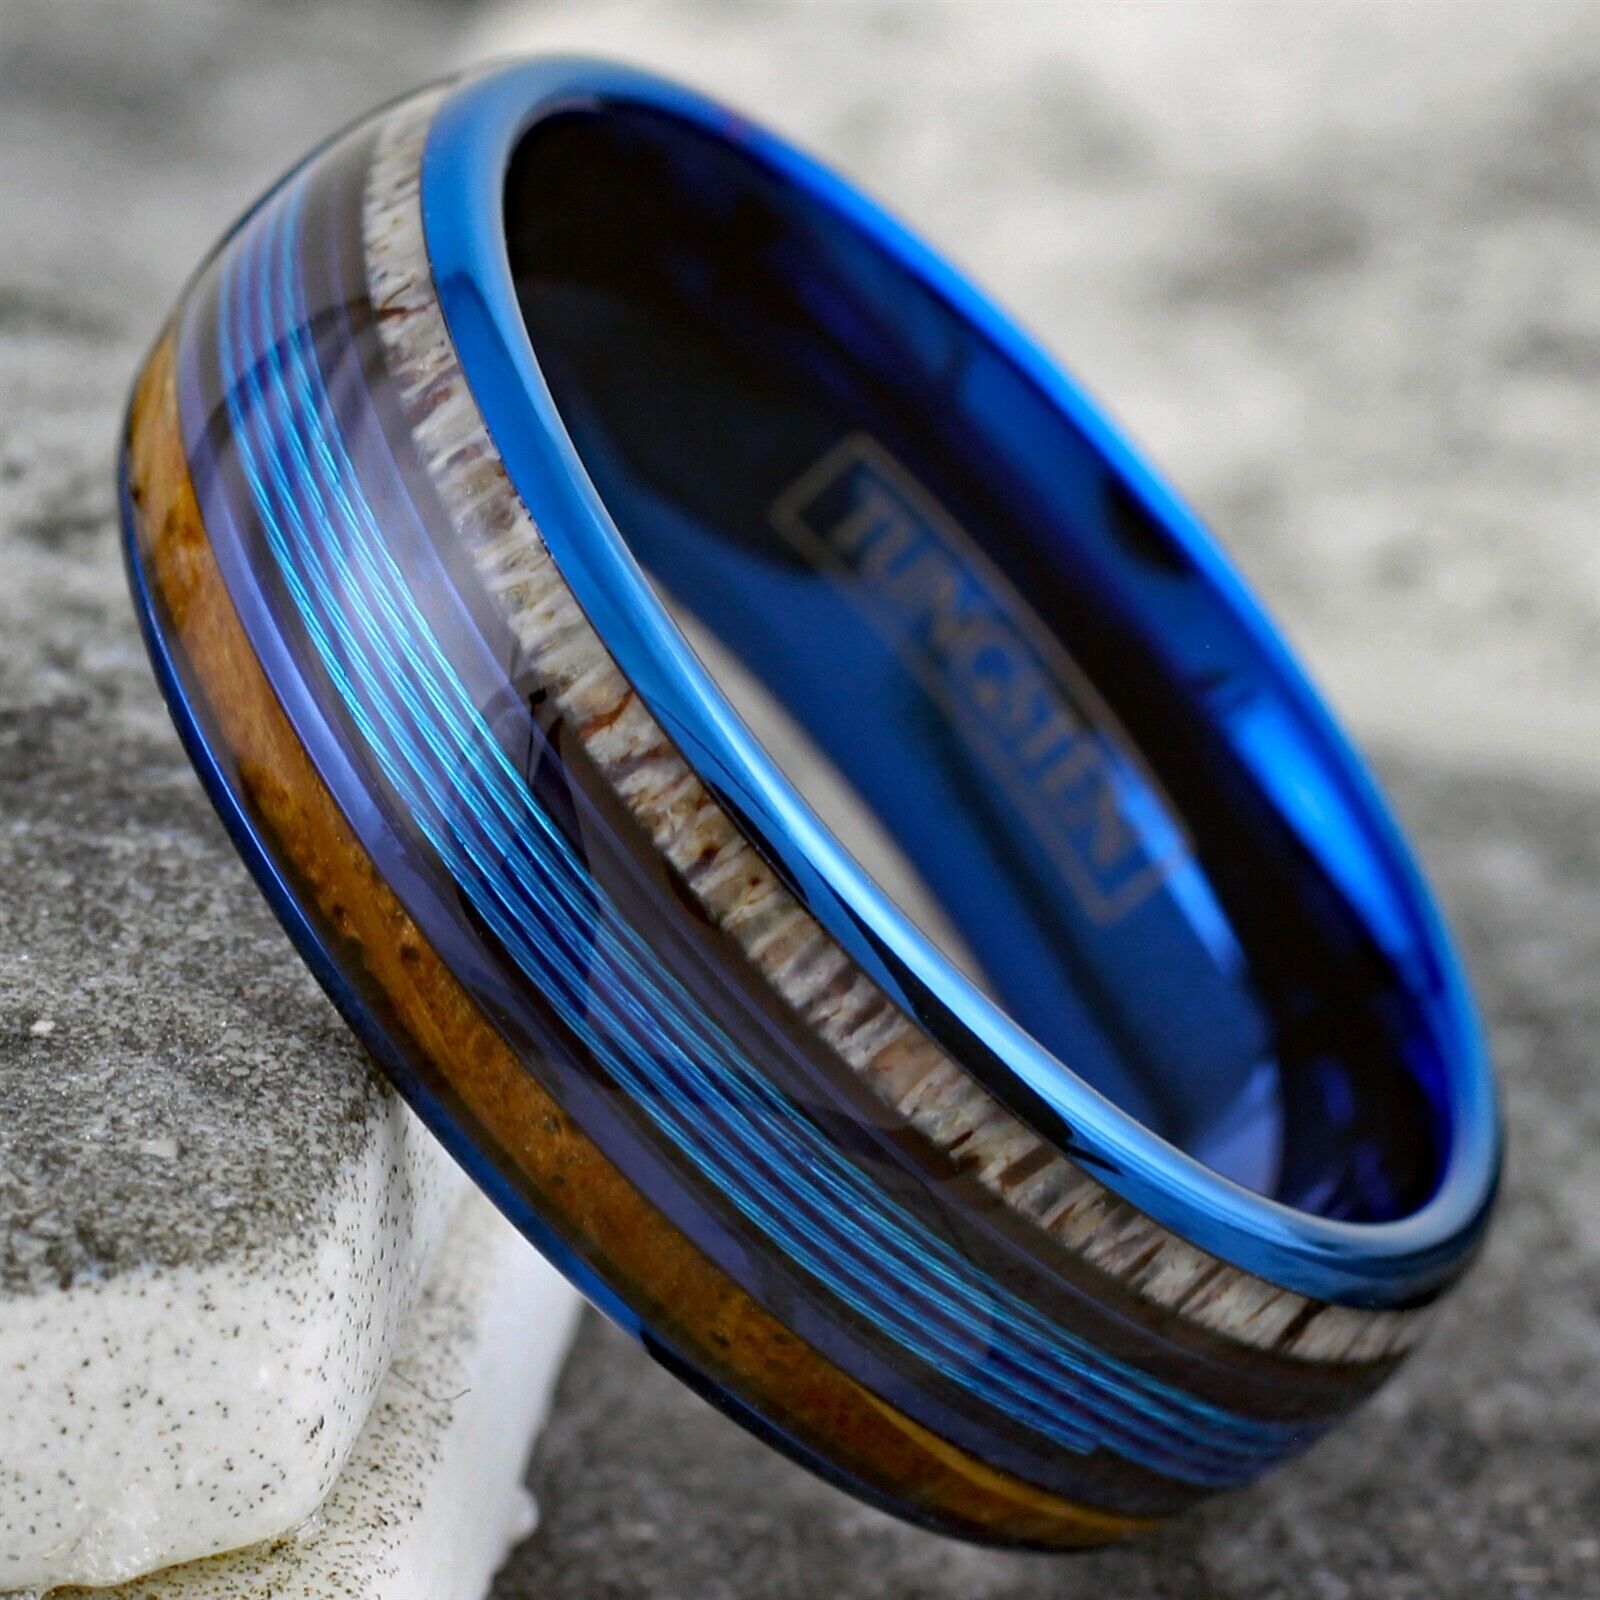 Gorgeous Polished Royal Blue Tungsten Low Dome Ring with Brilliant Blue Real Fishing Line Between Whiskey Barrel Oak Wood and Deer Antler Inlays.